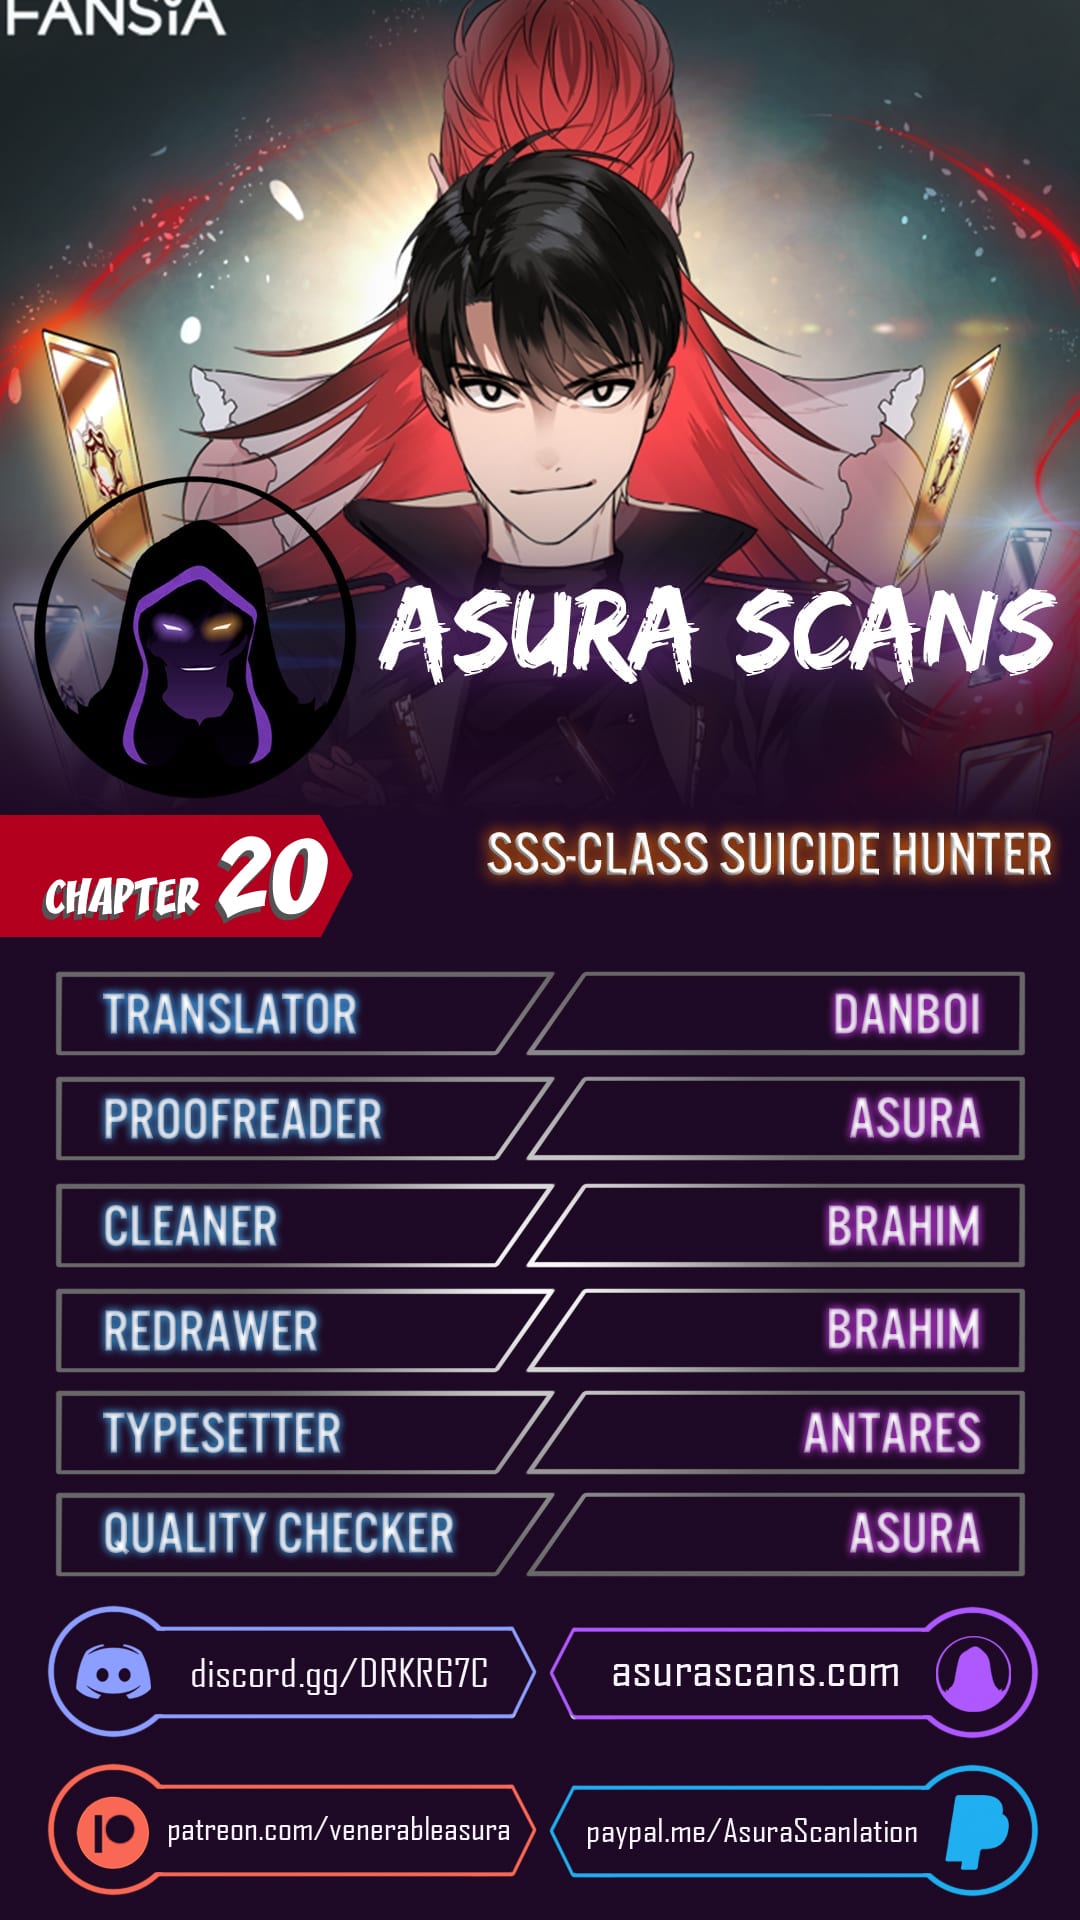 SSS-Class Suicide Hunter chapter 20